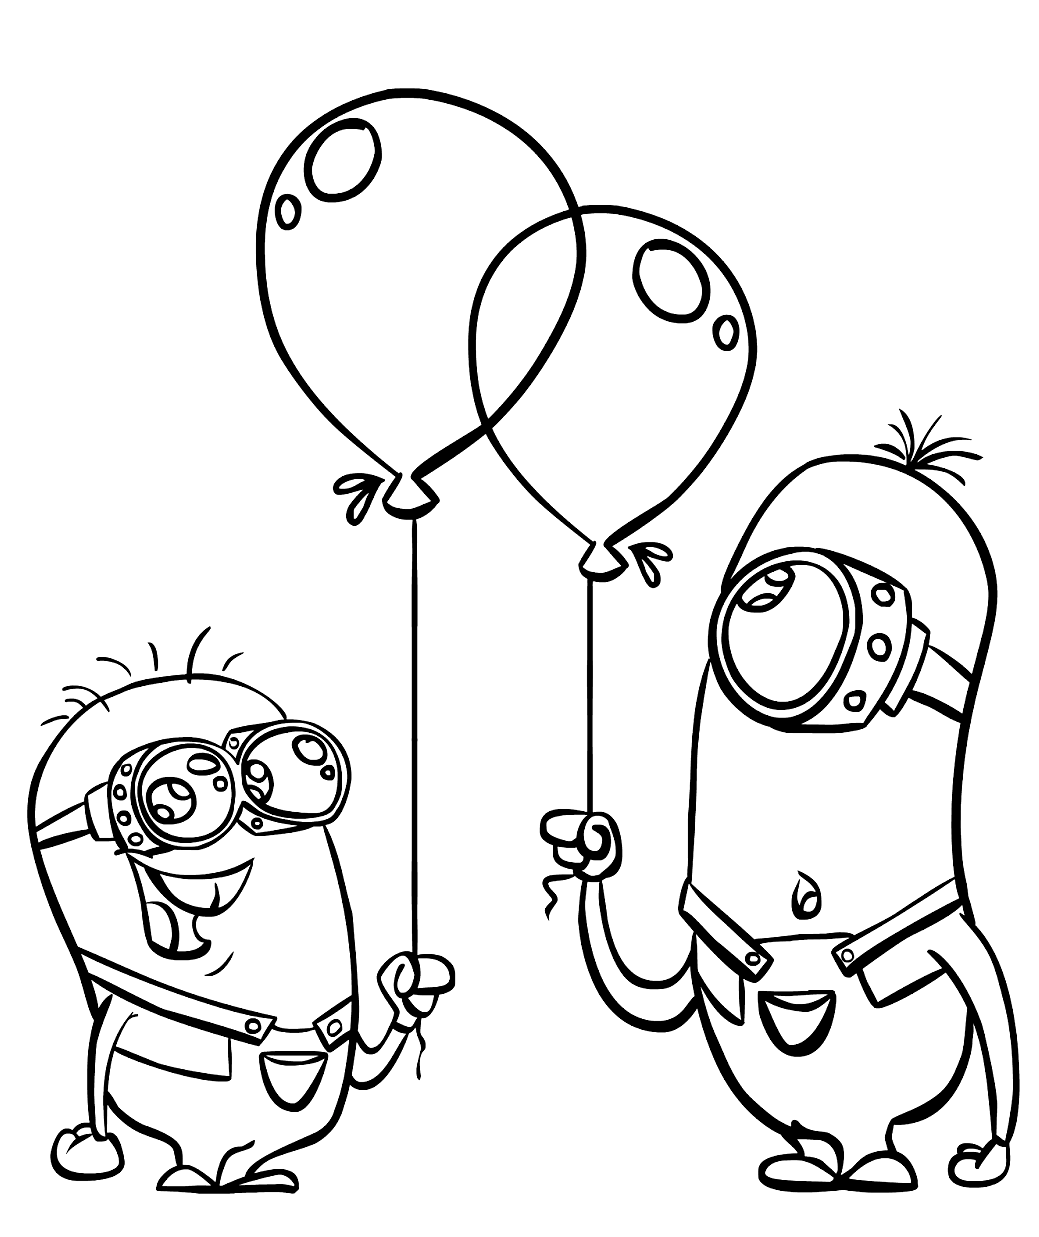 Minions from the Despicable Me films Coloring Page